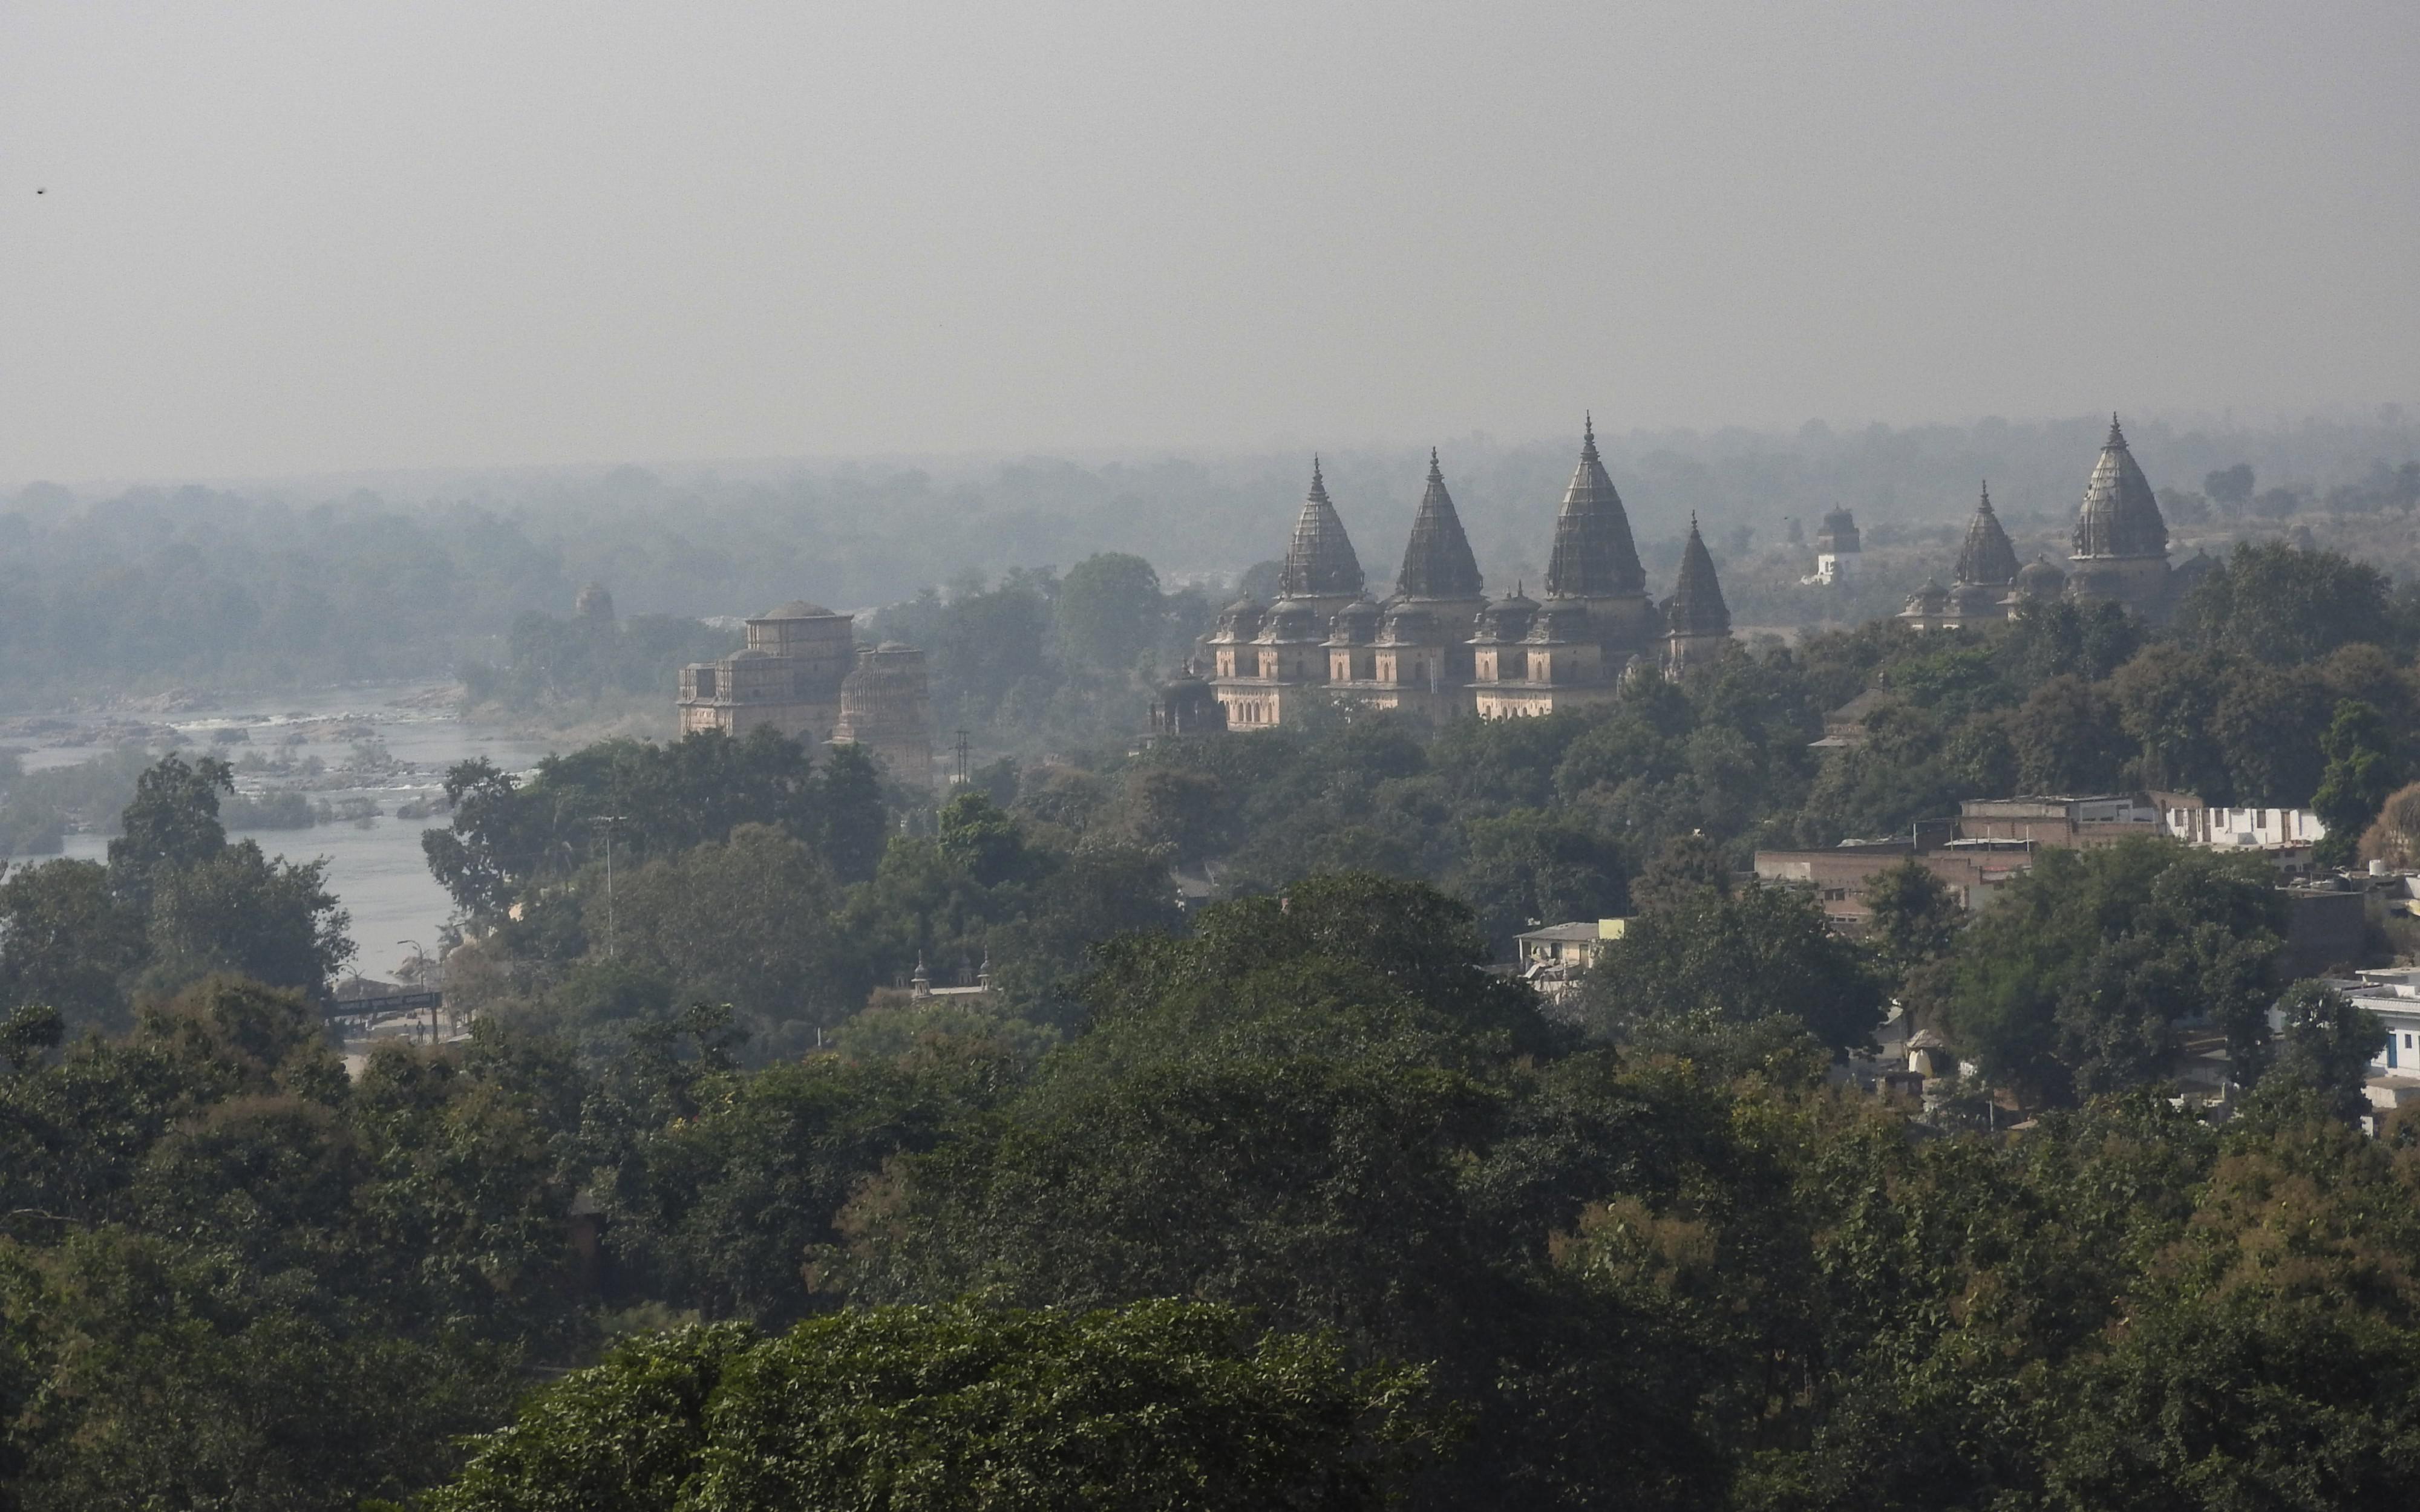 From Jahangir Mahal, take in the views of the Betwa river, as well as the grand procession of cenotaphs that line it. 